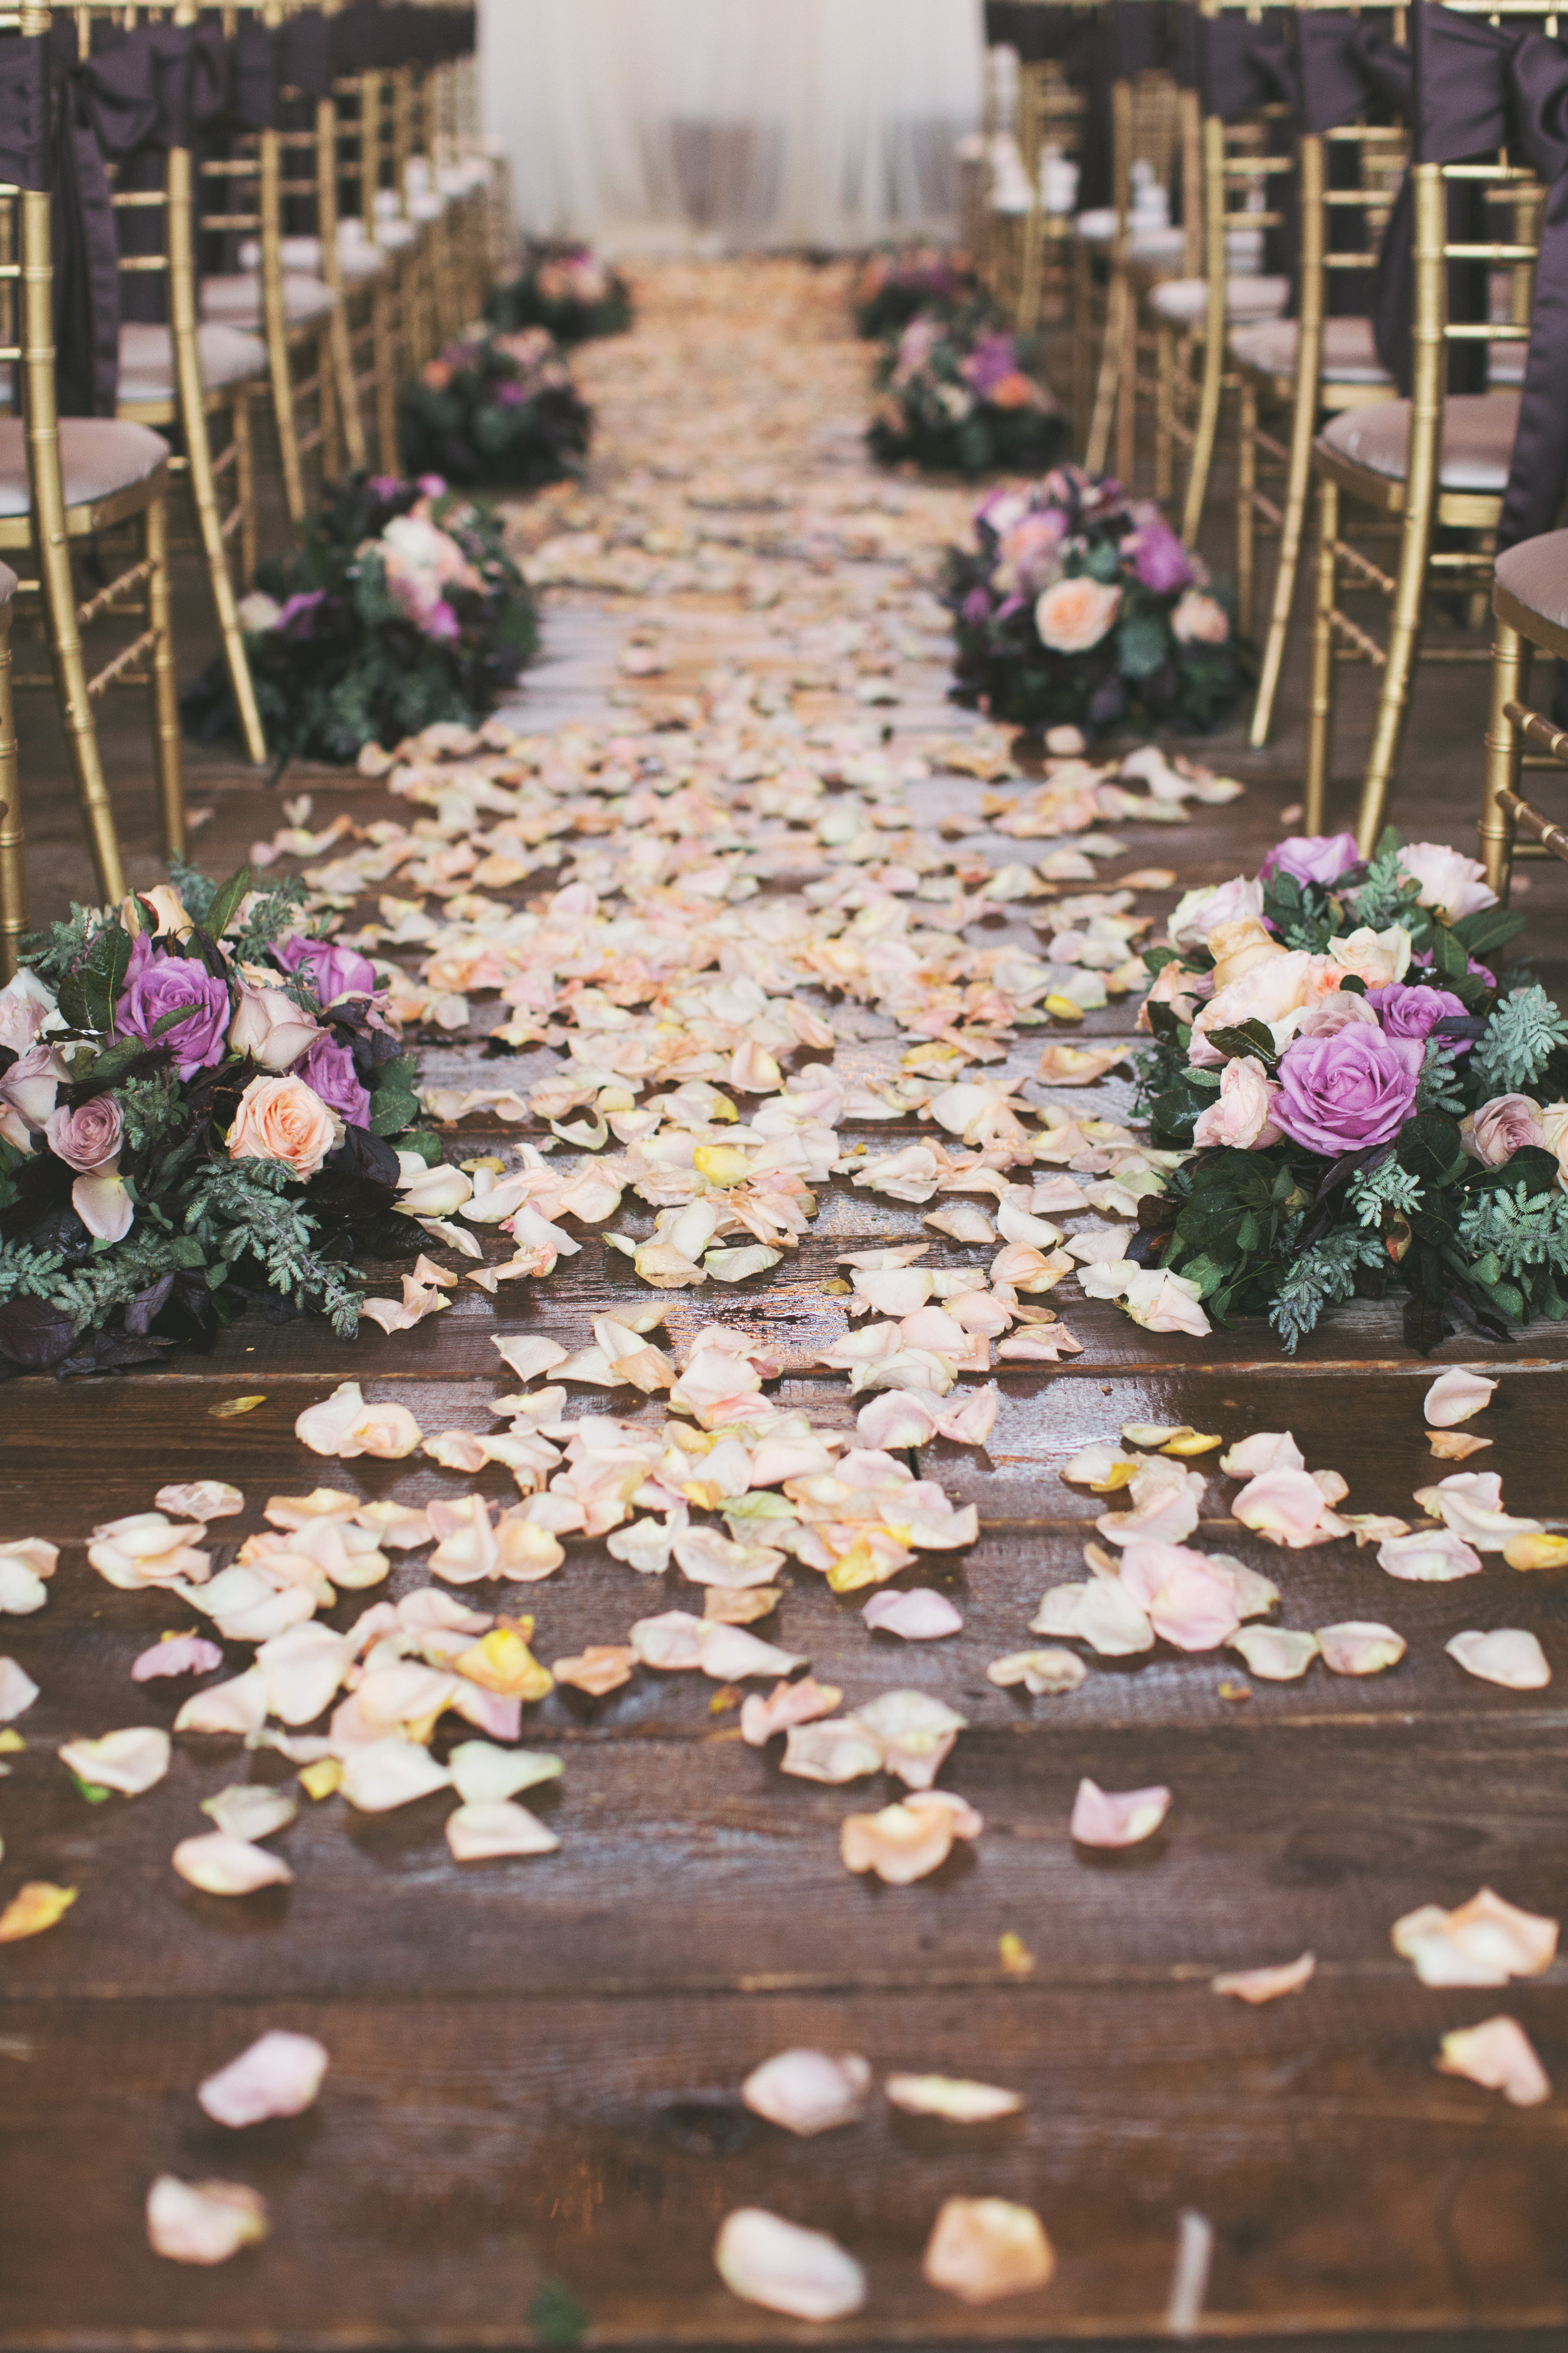 Plum and Gold Autumn Wedding | High Star Ranch Wedding | Rustic and Elegant Wedding | Michelle Leo Events | Utah Event Planner and Designer | Alixann Loosle Photography